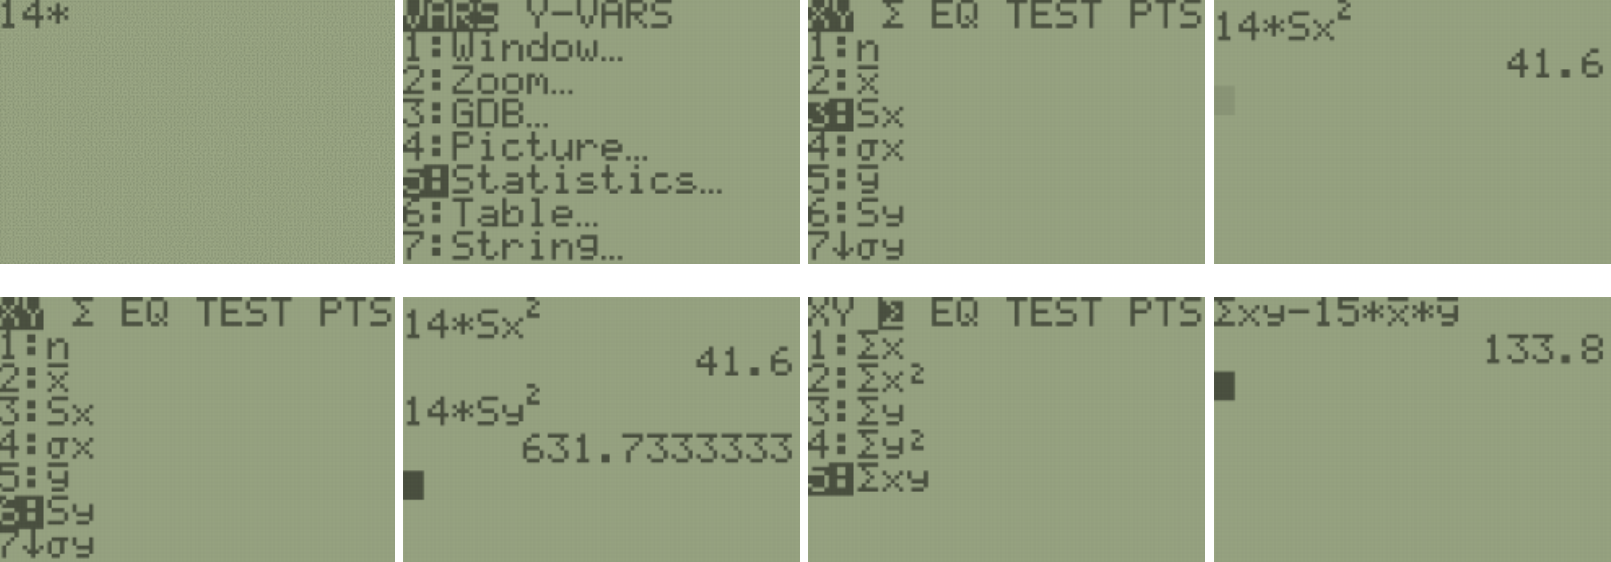 Performing calculations using the stored values created from the 2-Variable Stat function, accessed through using the VARS key followed by the Statistics option. Calculations include multiplying the standard deviation of each variable by n-1, or 14, and subtracting 15 times the product of the x and y means from the sum of x times y.